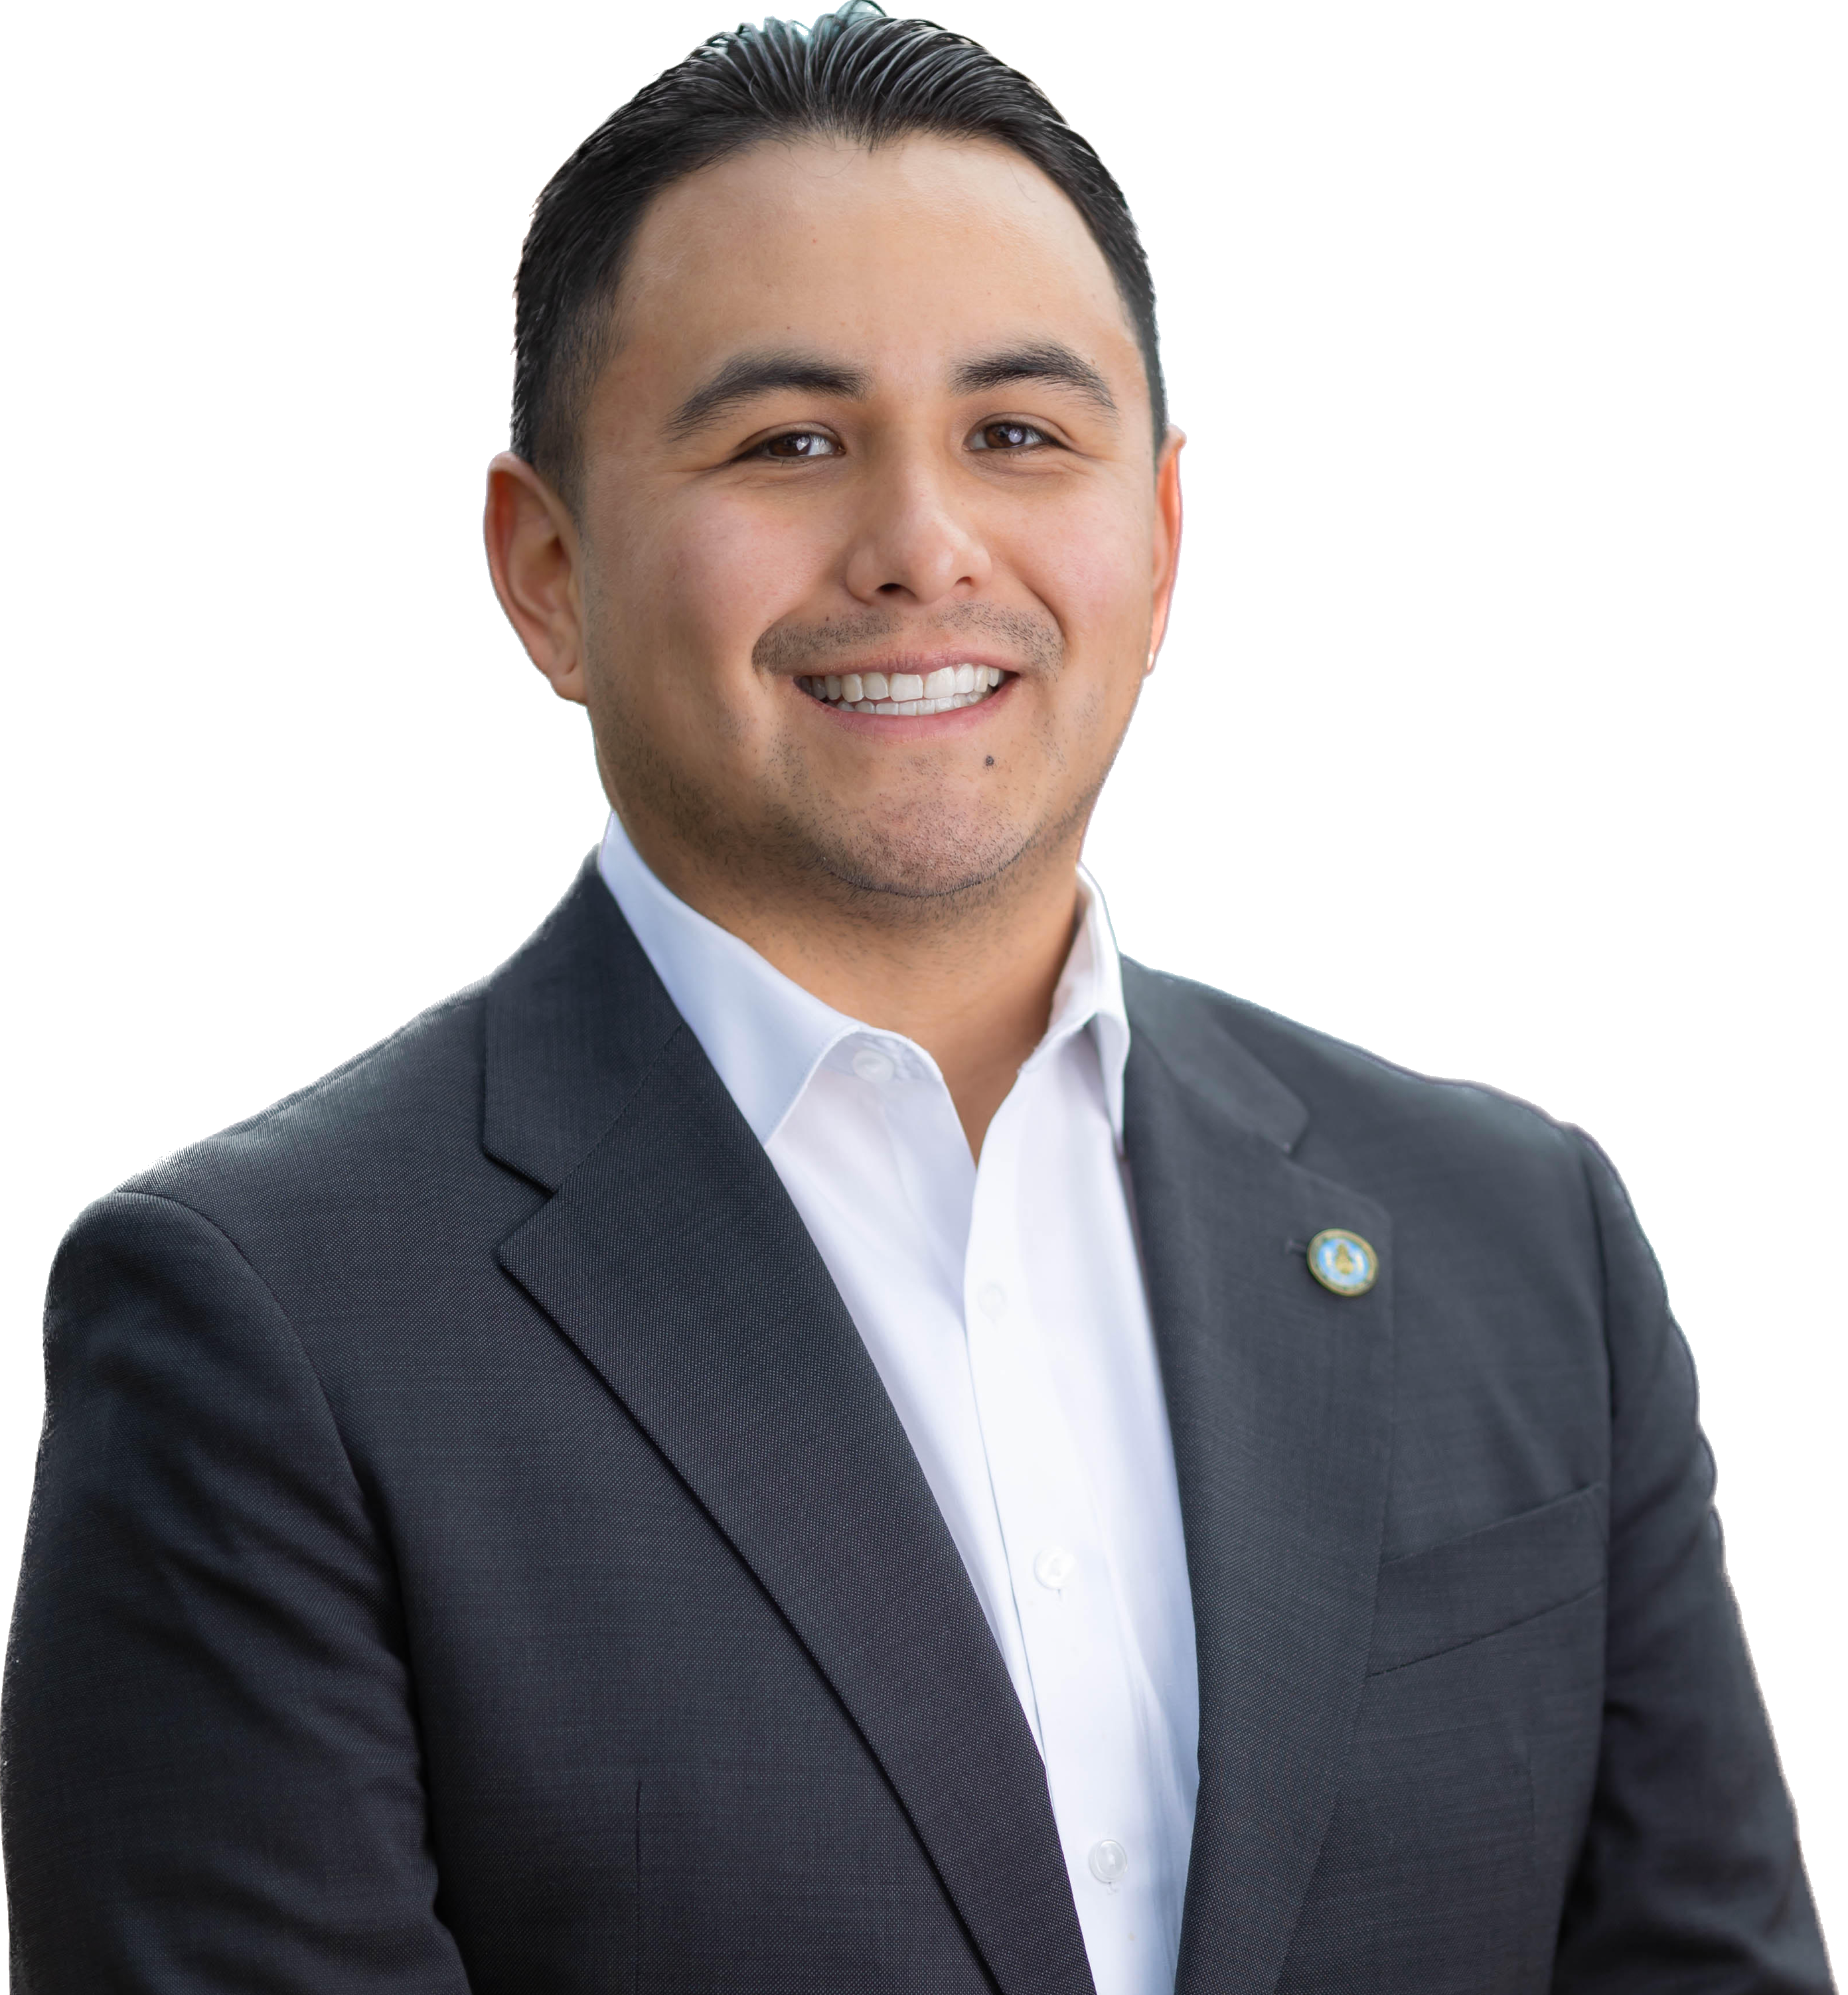 Julio was born and raised in San Diego and has family roots in Tijuana. He is a proud community member and resident of City Heights. He currently serves as a Government Affairs Manager for the San Diego City Council. In his role he advises the City of San Diego Council President on matters relating to MTS, SANDAG, and others.  He earned a BA in Latin American and Latino Studies and a minor in Legal Studies from UC Santa Cruz.  In his free time, he enjoys riding bikes and watching Padres games.  